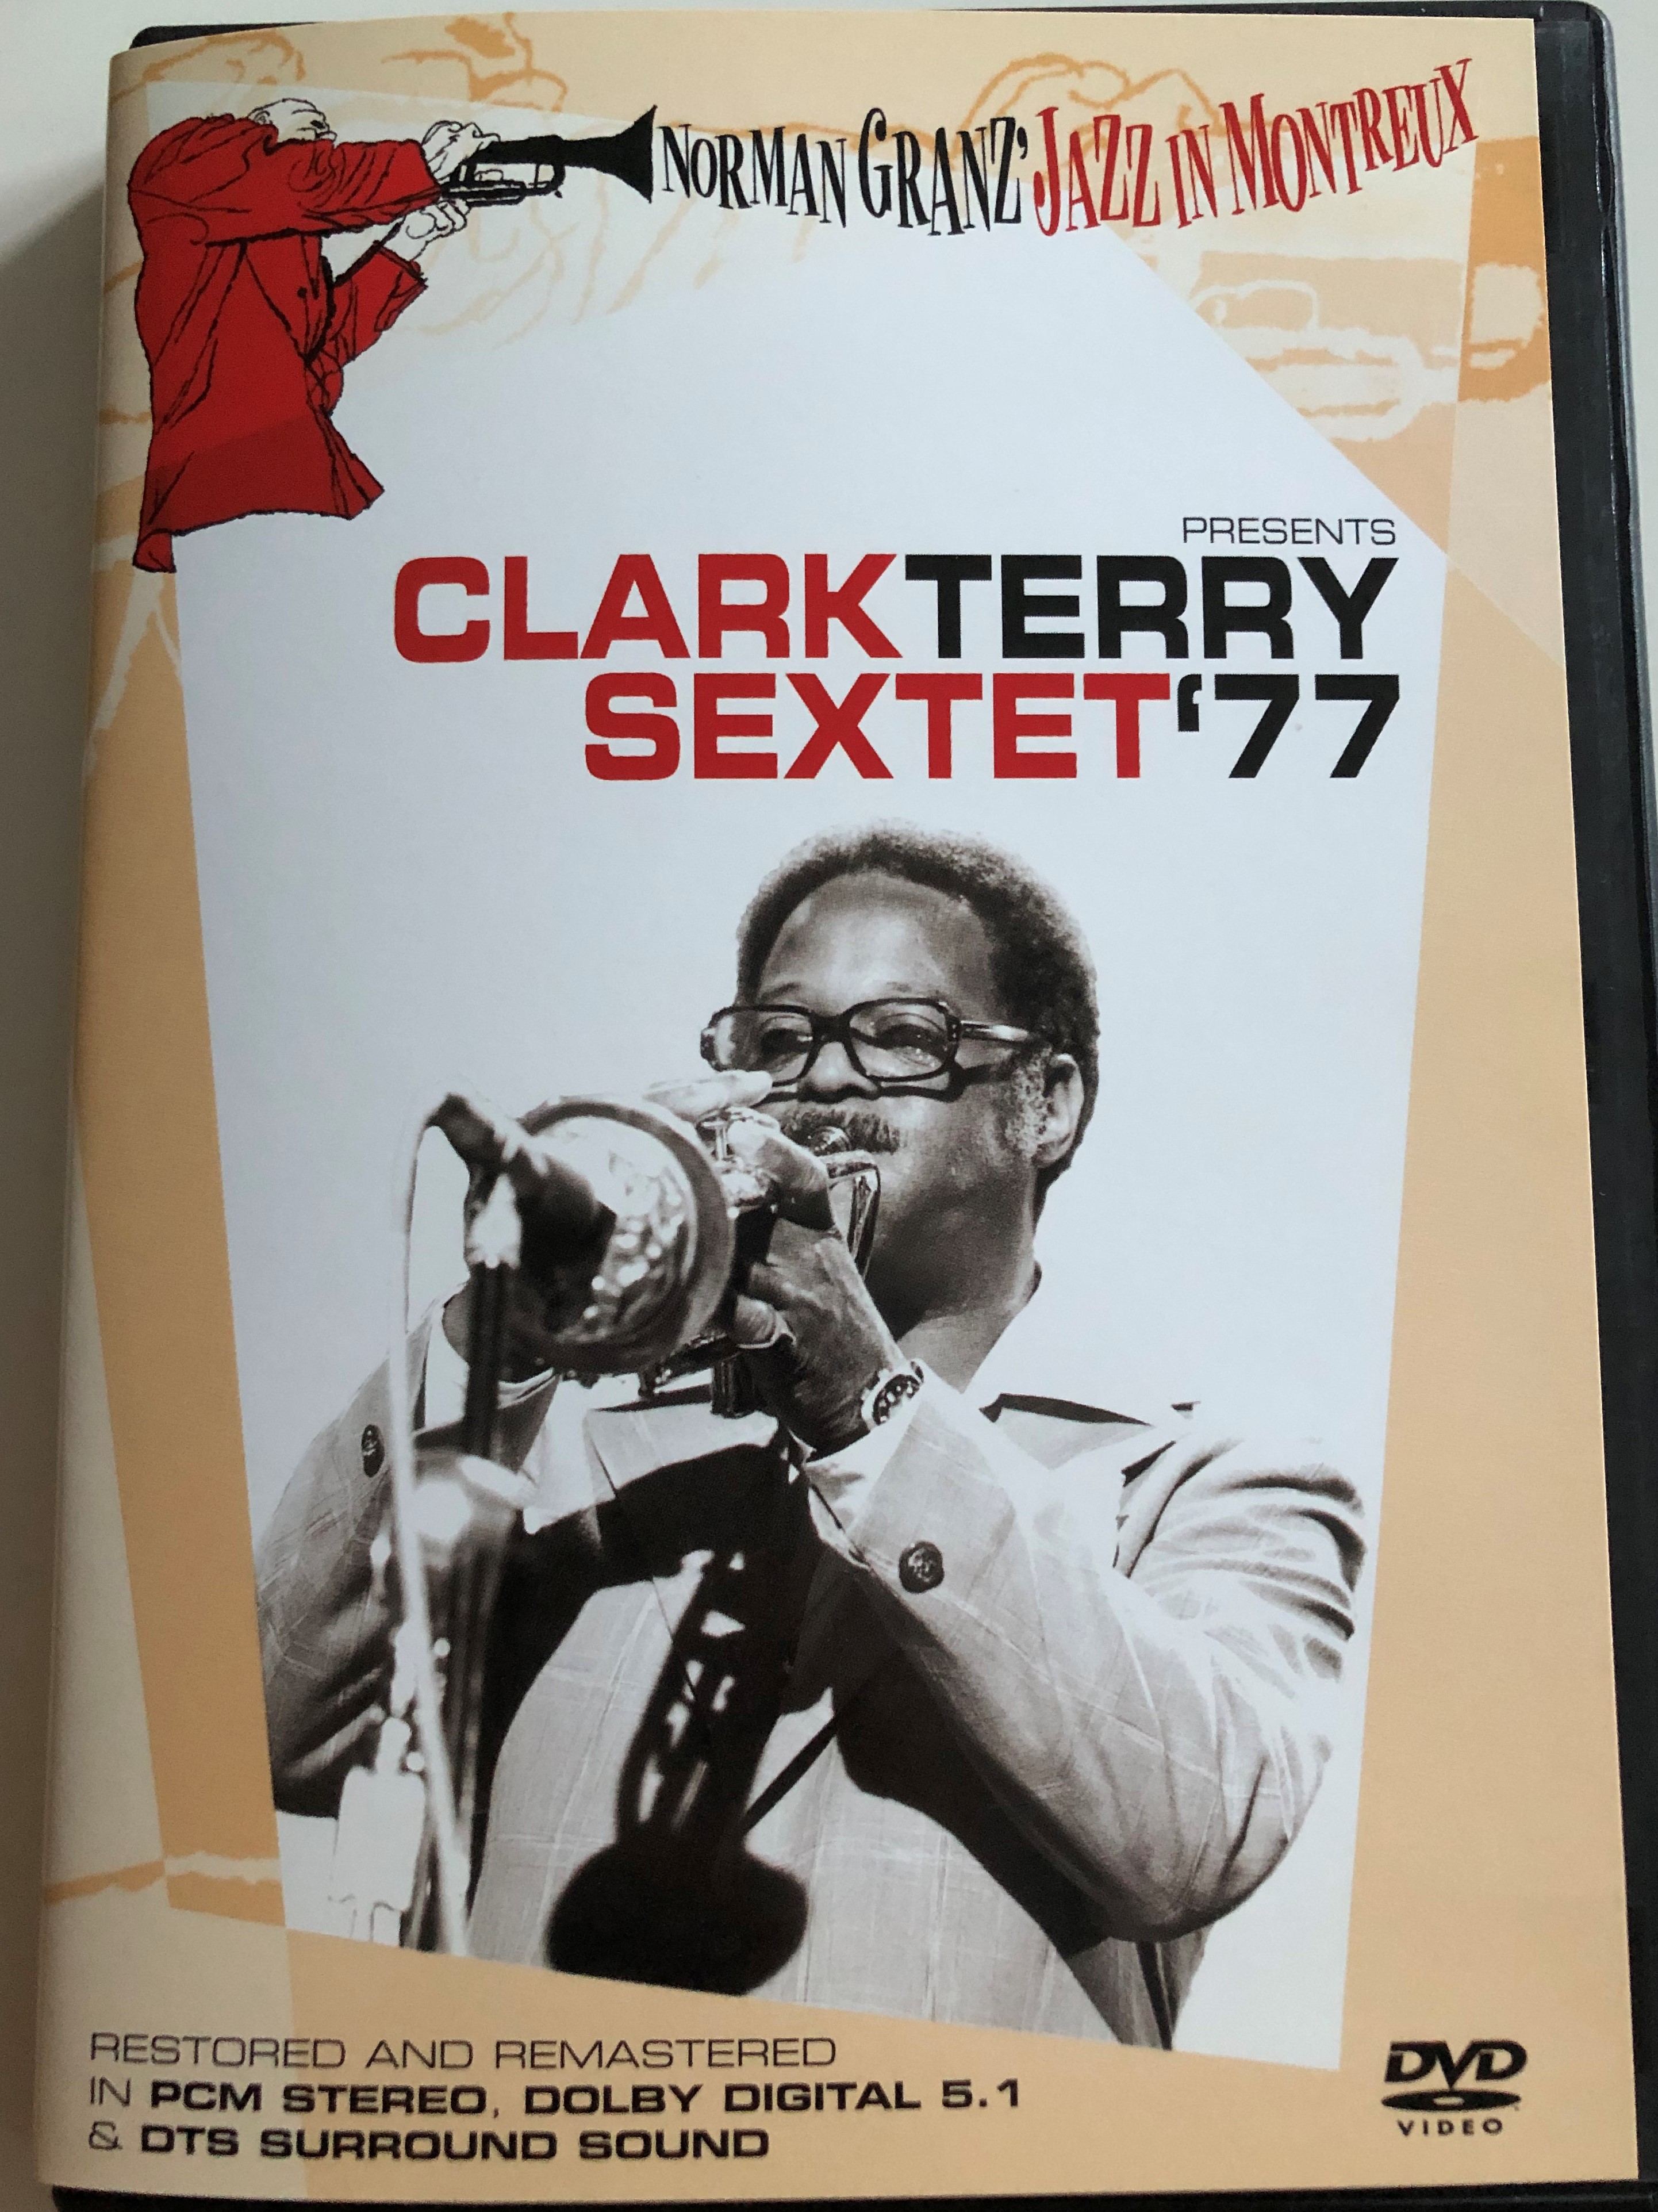 clark-terry-sextet-77-dvd-2005-norman-granz-jazz-in-montreux-minor-blues-pennies-from-heaven-sama-de-orfeu-god-bless-the-childrestored-and-remastered-in-dolby-digital-5.1-dts-surround-1-.jpg